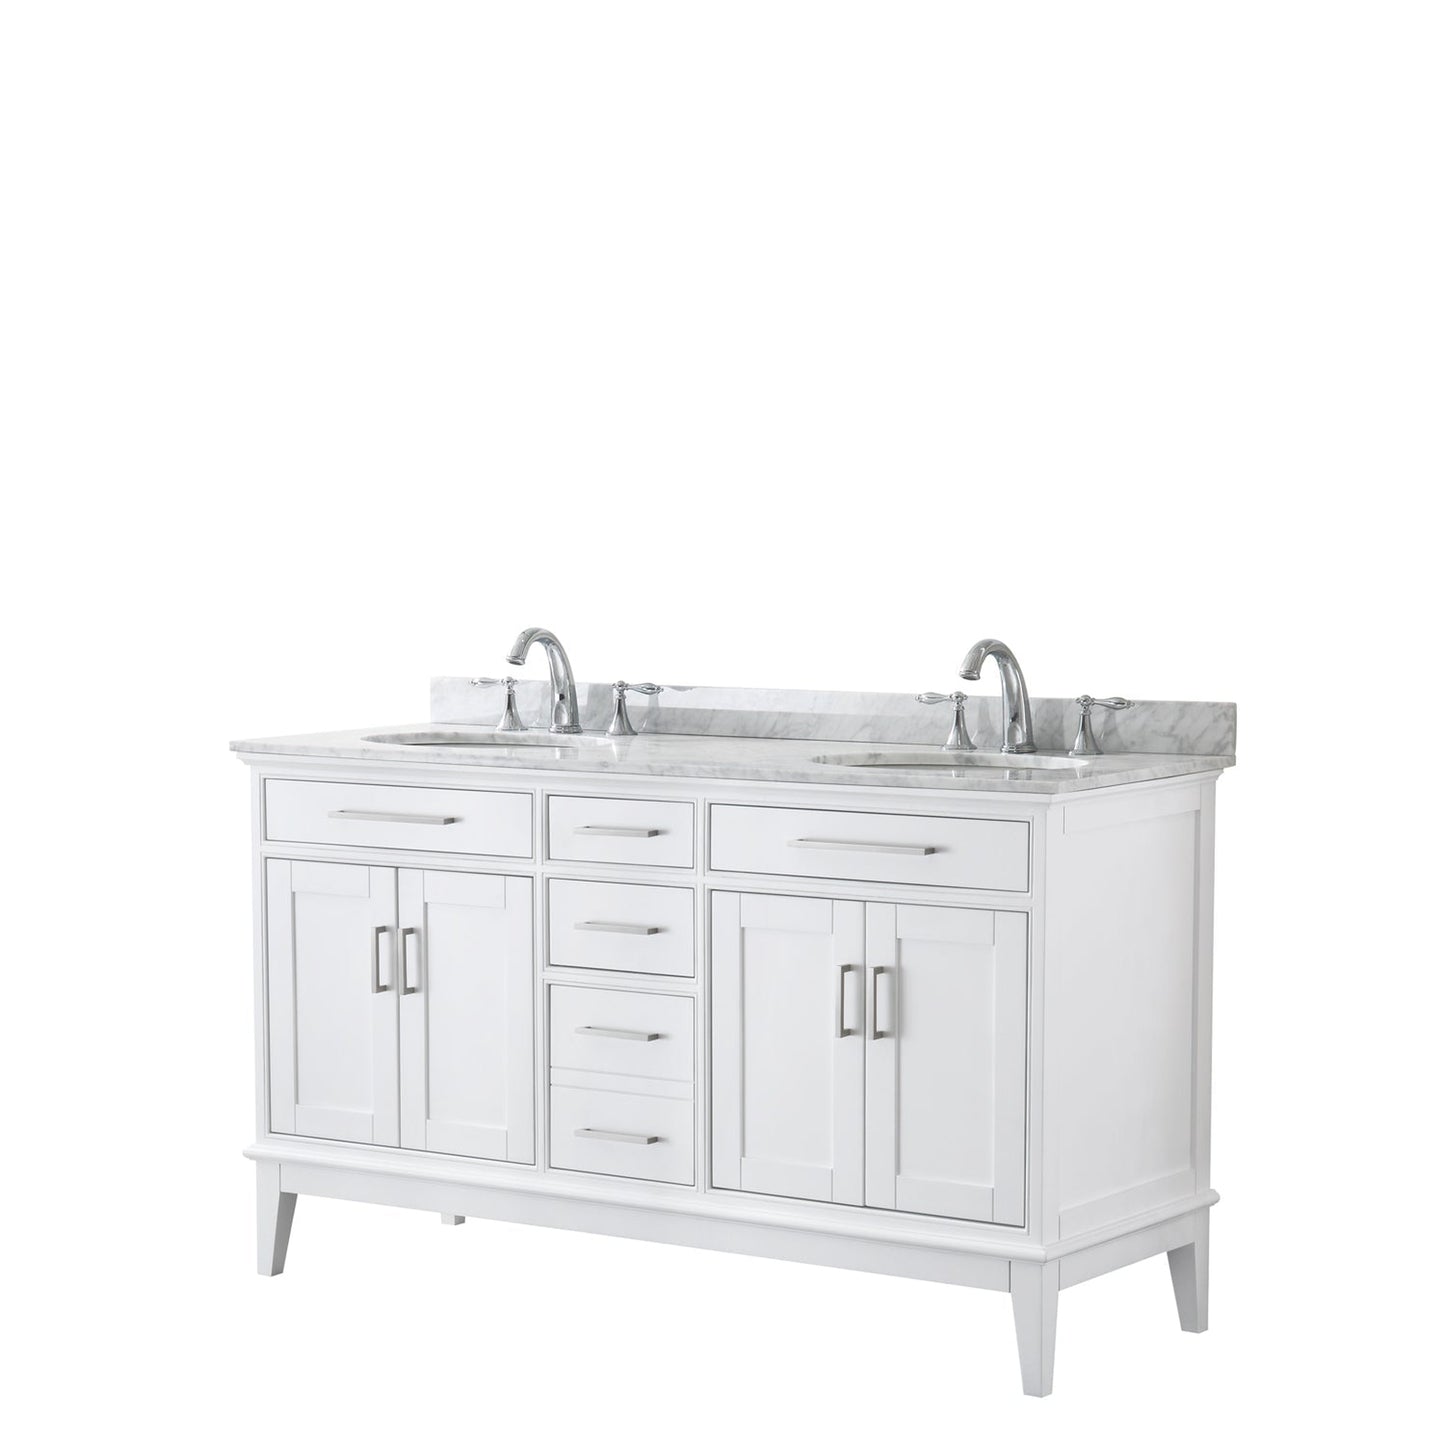 Wyndham Collection Margate 60" Double Bathroom White Vanity With White Carrara Marble Countertop And Undermount Oval Sink